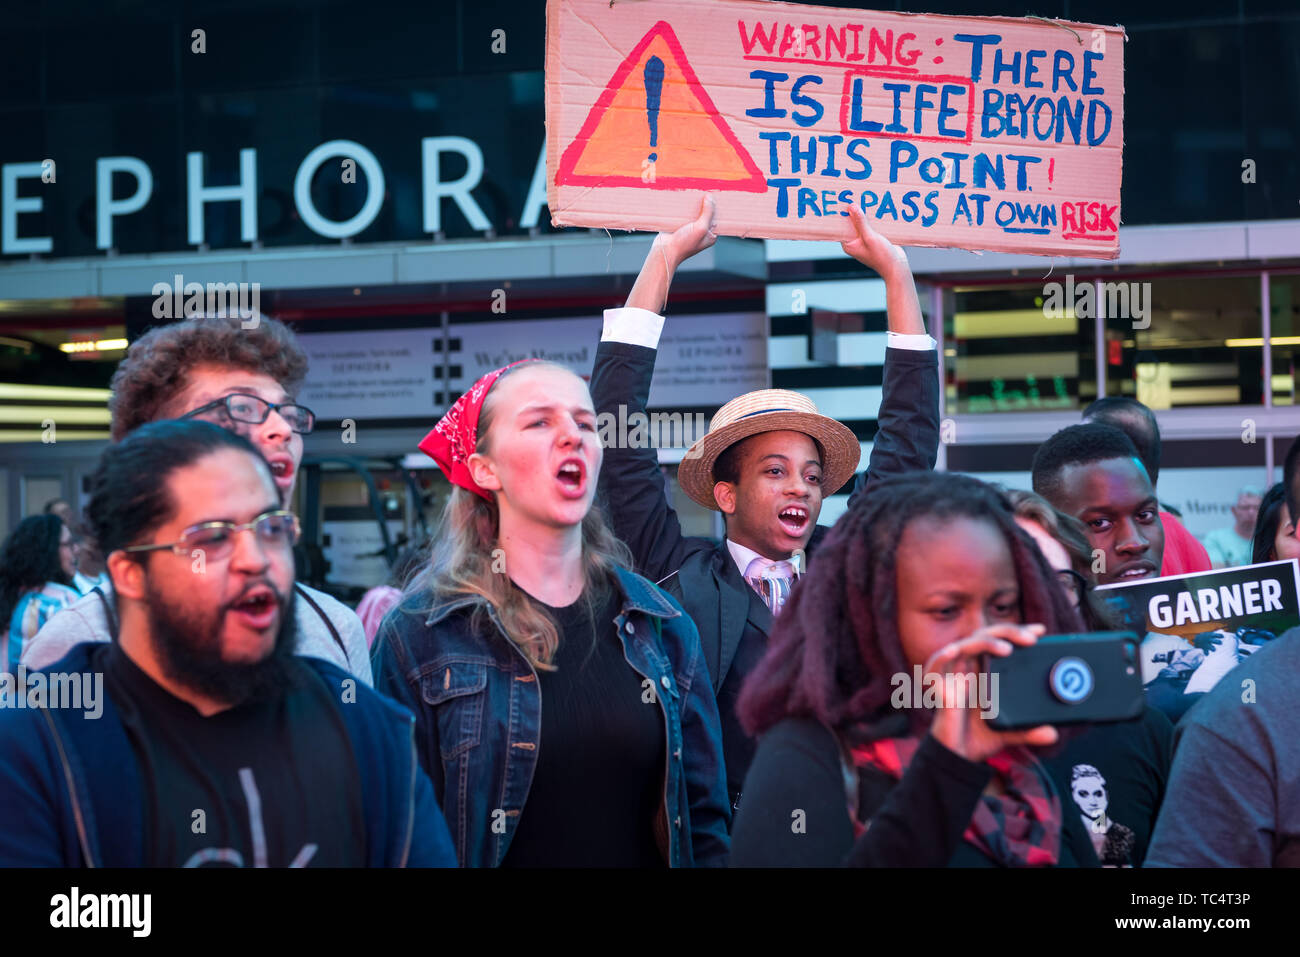 New York, United States. 04th June, 2019. On June 4, 2019, protesters rallied in Times Square in New York City demanding the firing of Officer Pantaleo for the choking death of Eric Garner in 2014. Daniel Pantaleo is currently standing administrative trial which began on May 13. On May 21, the judge overseeing his case delayed the remainder of the hearing until June 5, 2019. Pantaleo has been on desk duty since Eric Garner's death and could face penalties ranging from loss of vacation days to firing from the NYPD. Credit: Gabriele Holtermann-Gorden/Pacific Press/Alamy Live News Stock Photo